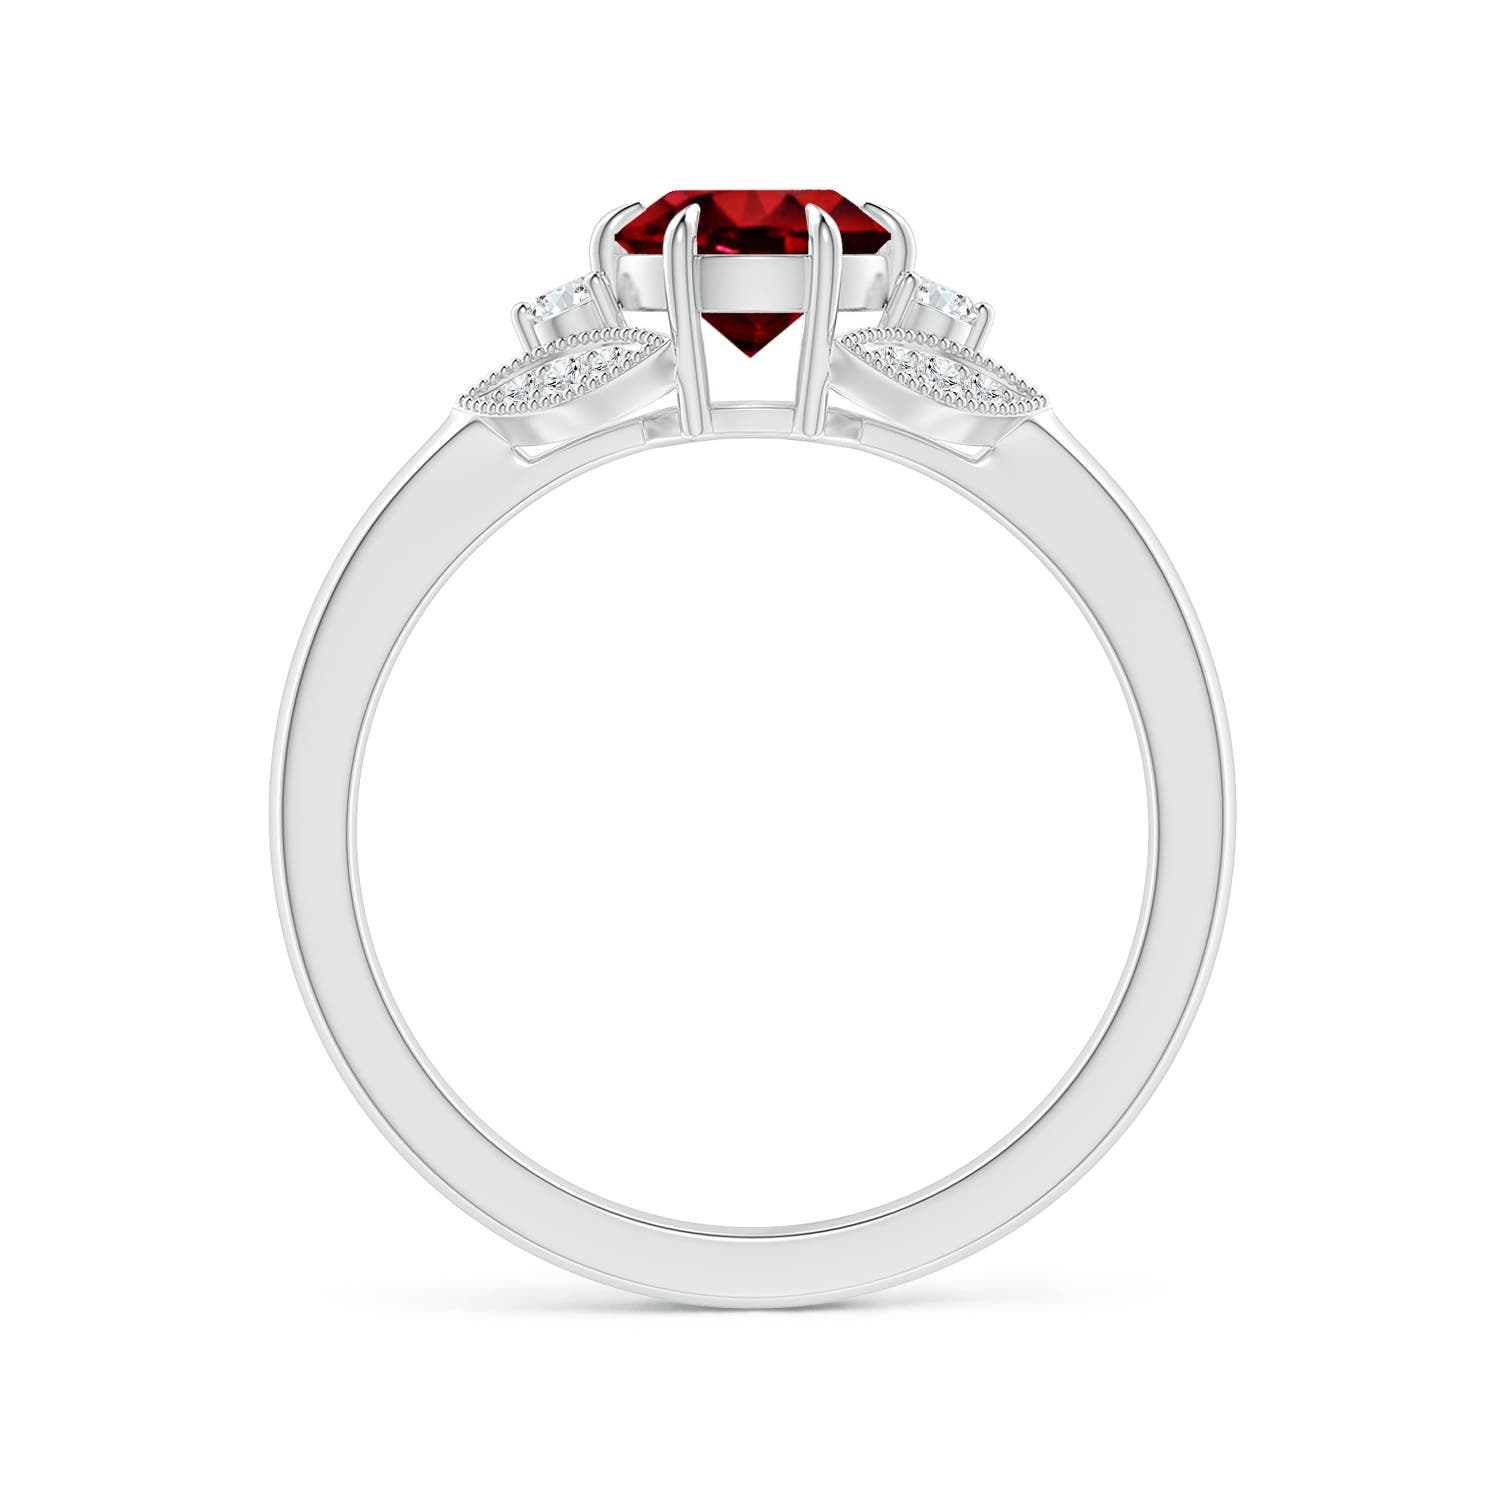 AAAA - Ruby / 1.1 CT / 14 KT White Gold